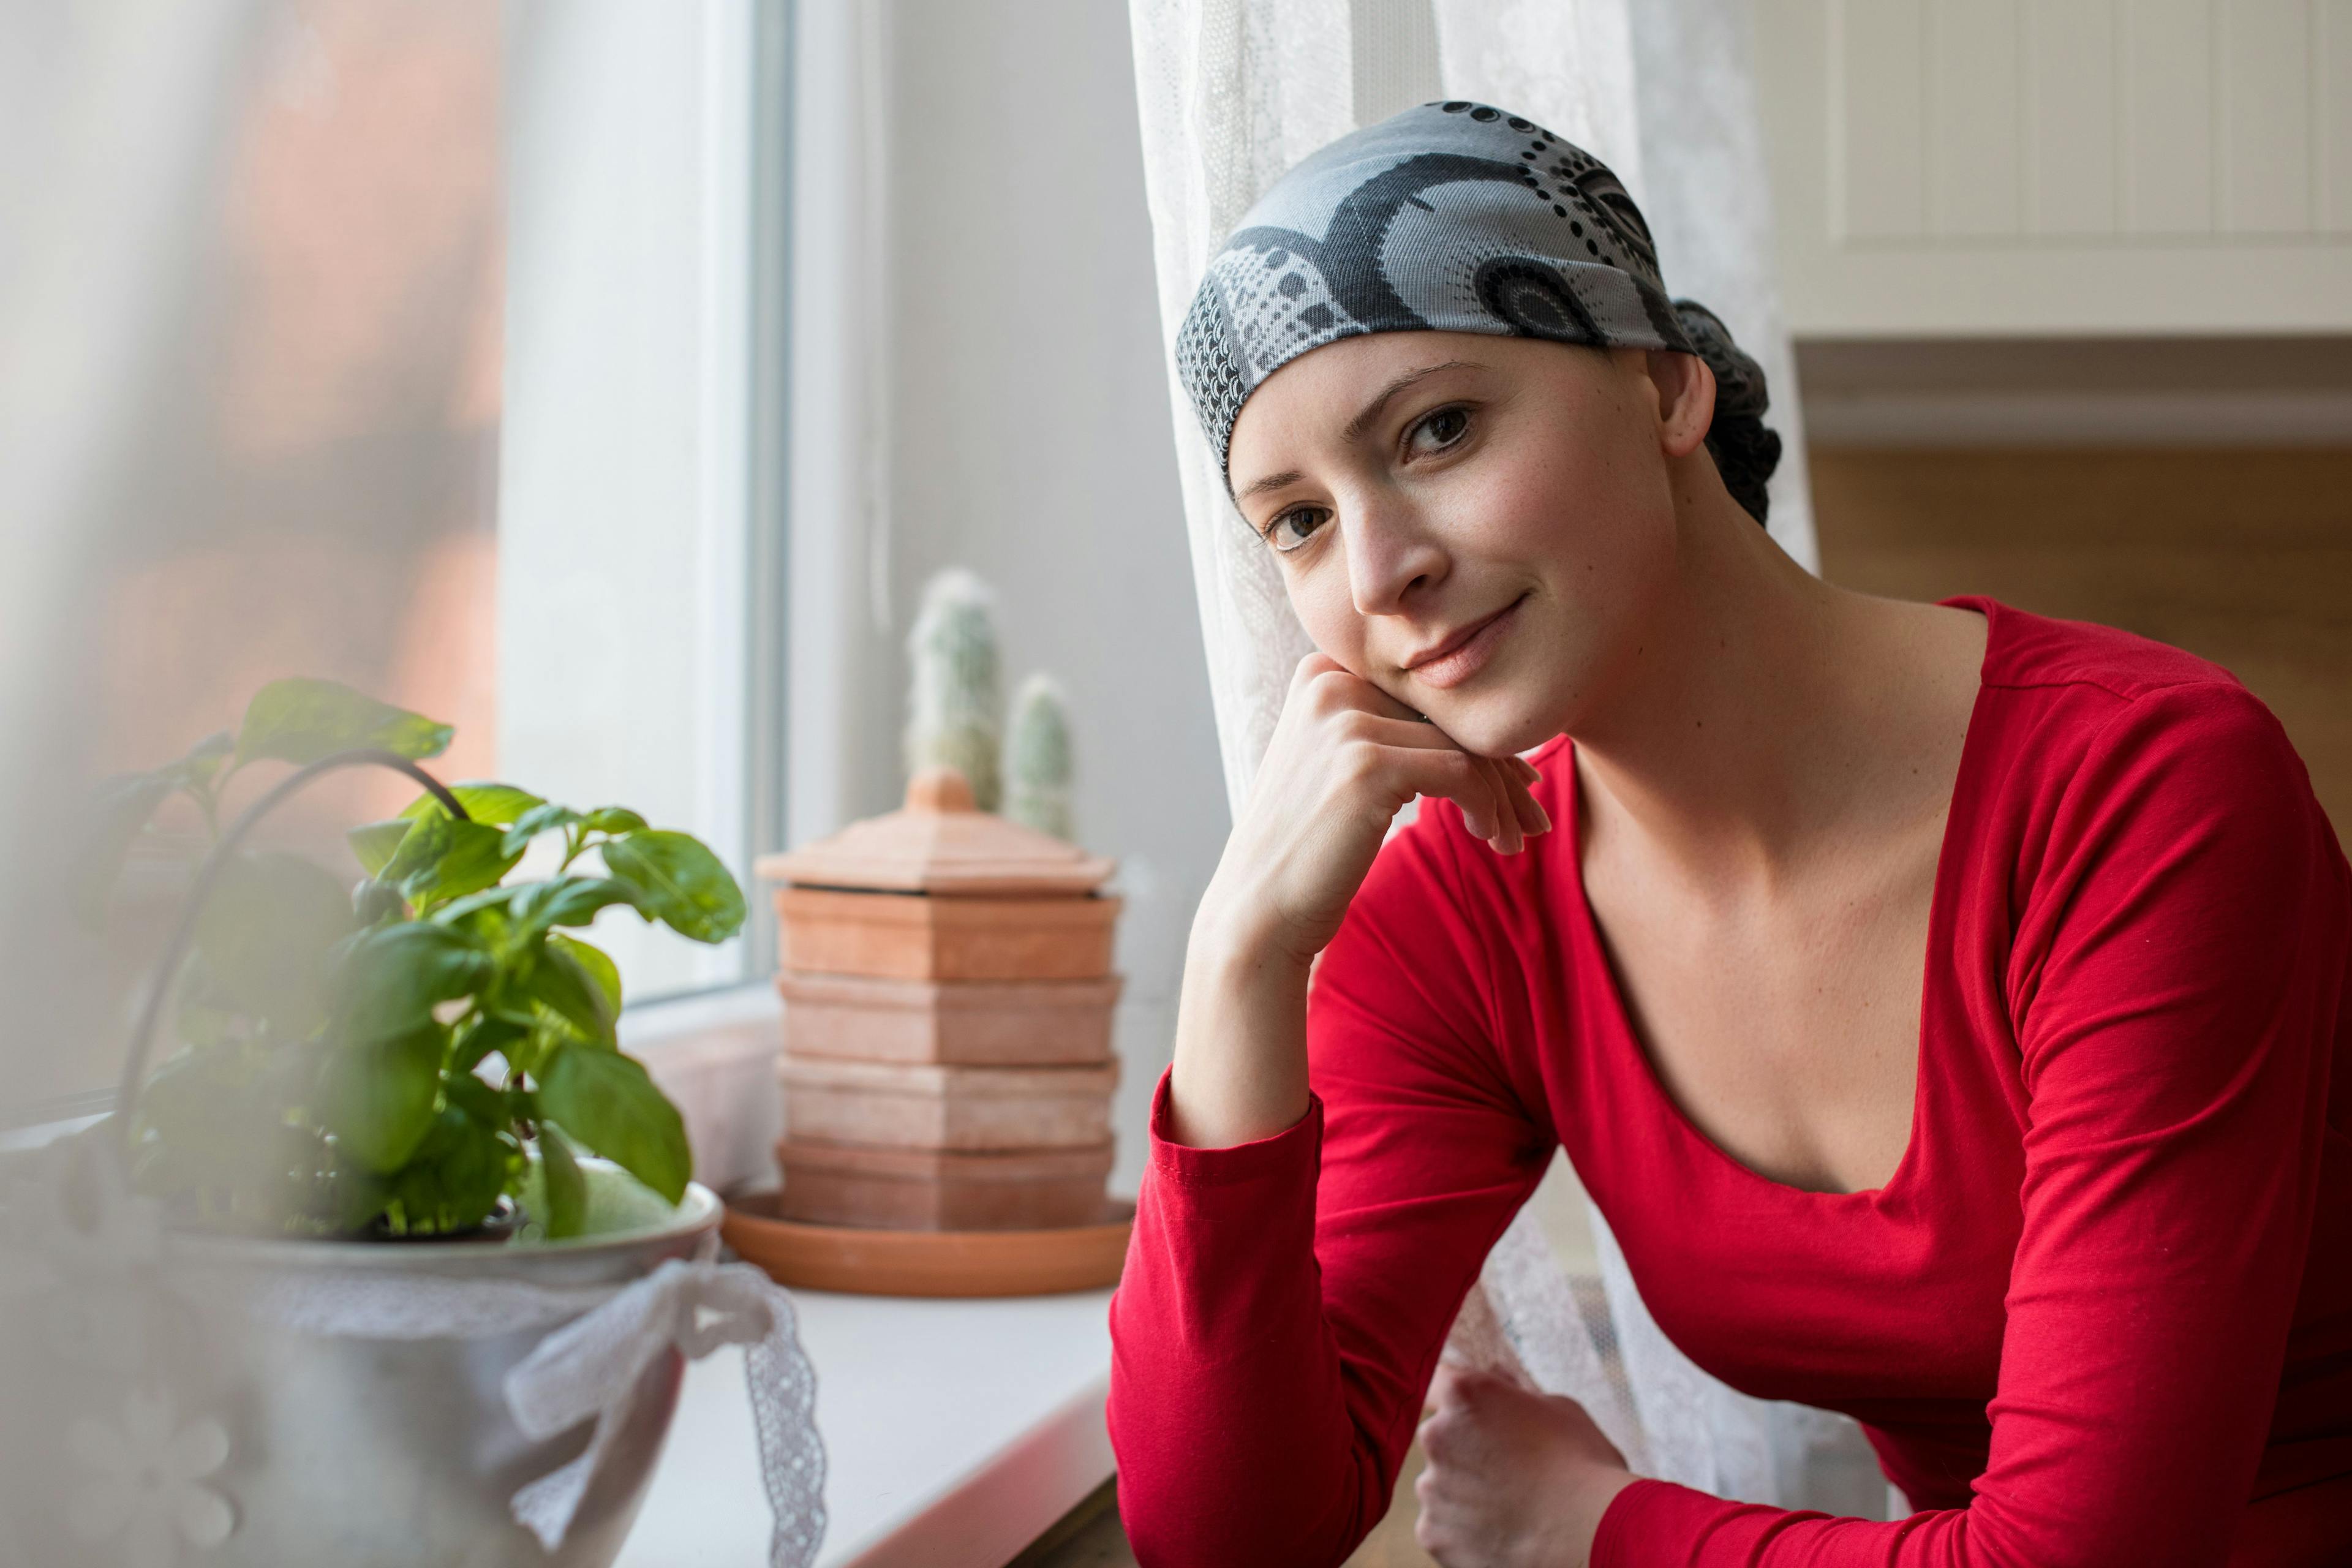 Young positive adult female cancer patient sitting in the kitchen by a window, smiling and looking at the camera. Credit: andreaobzerova - stock.adobe.com